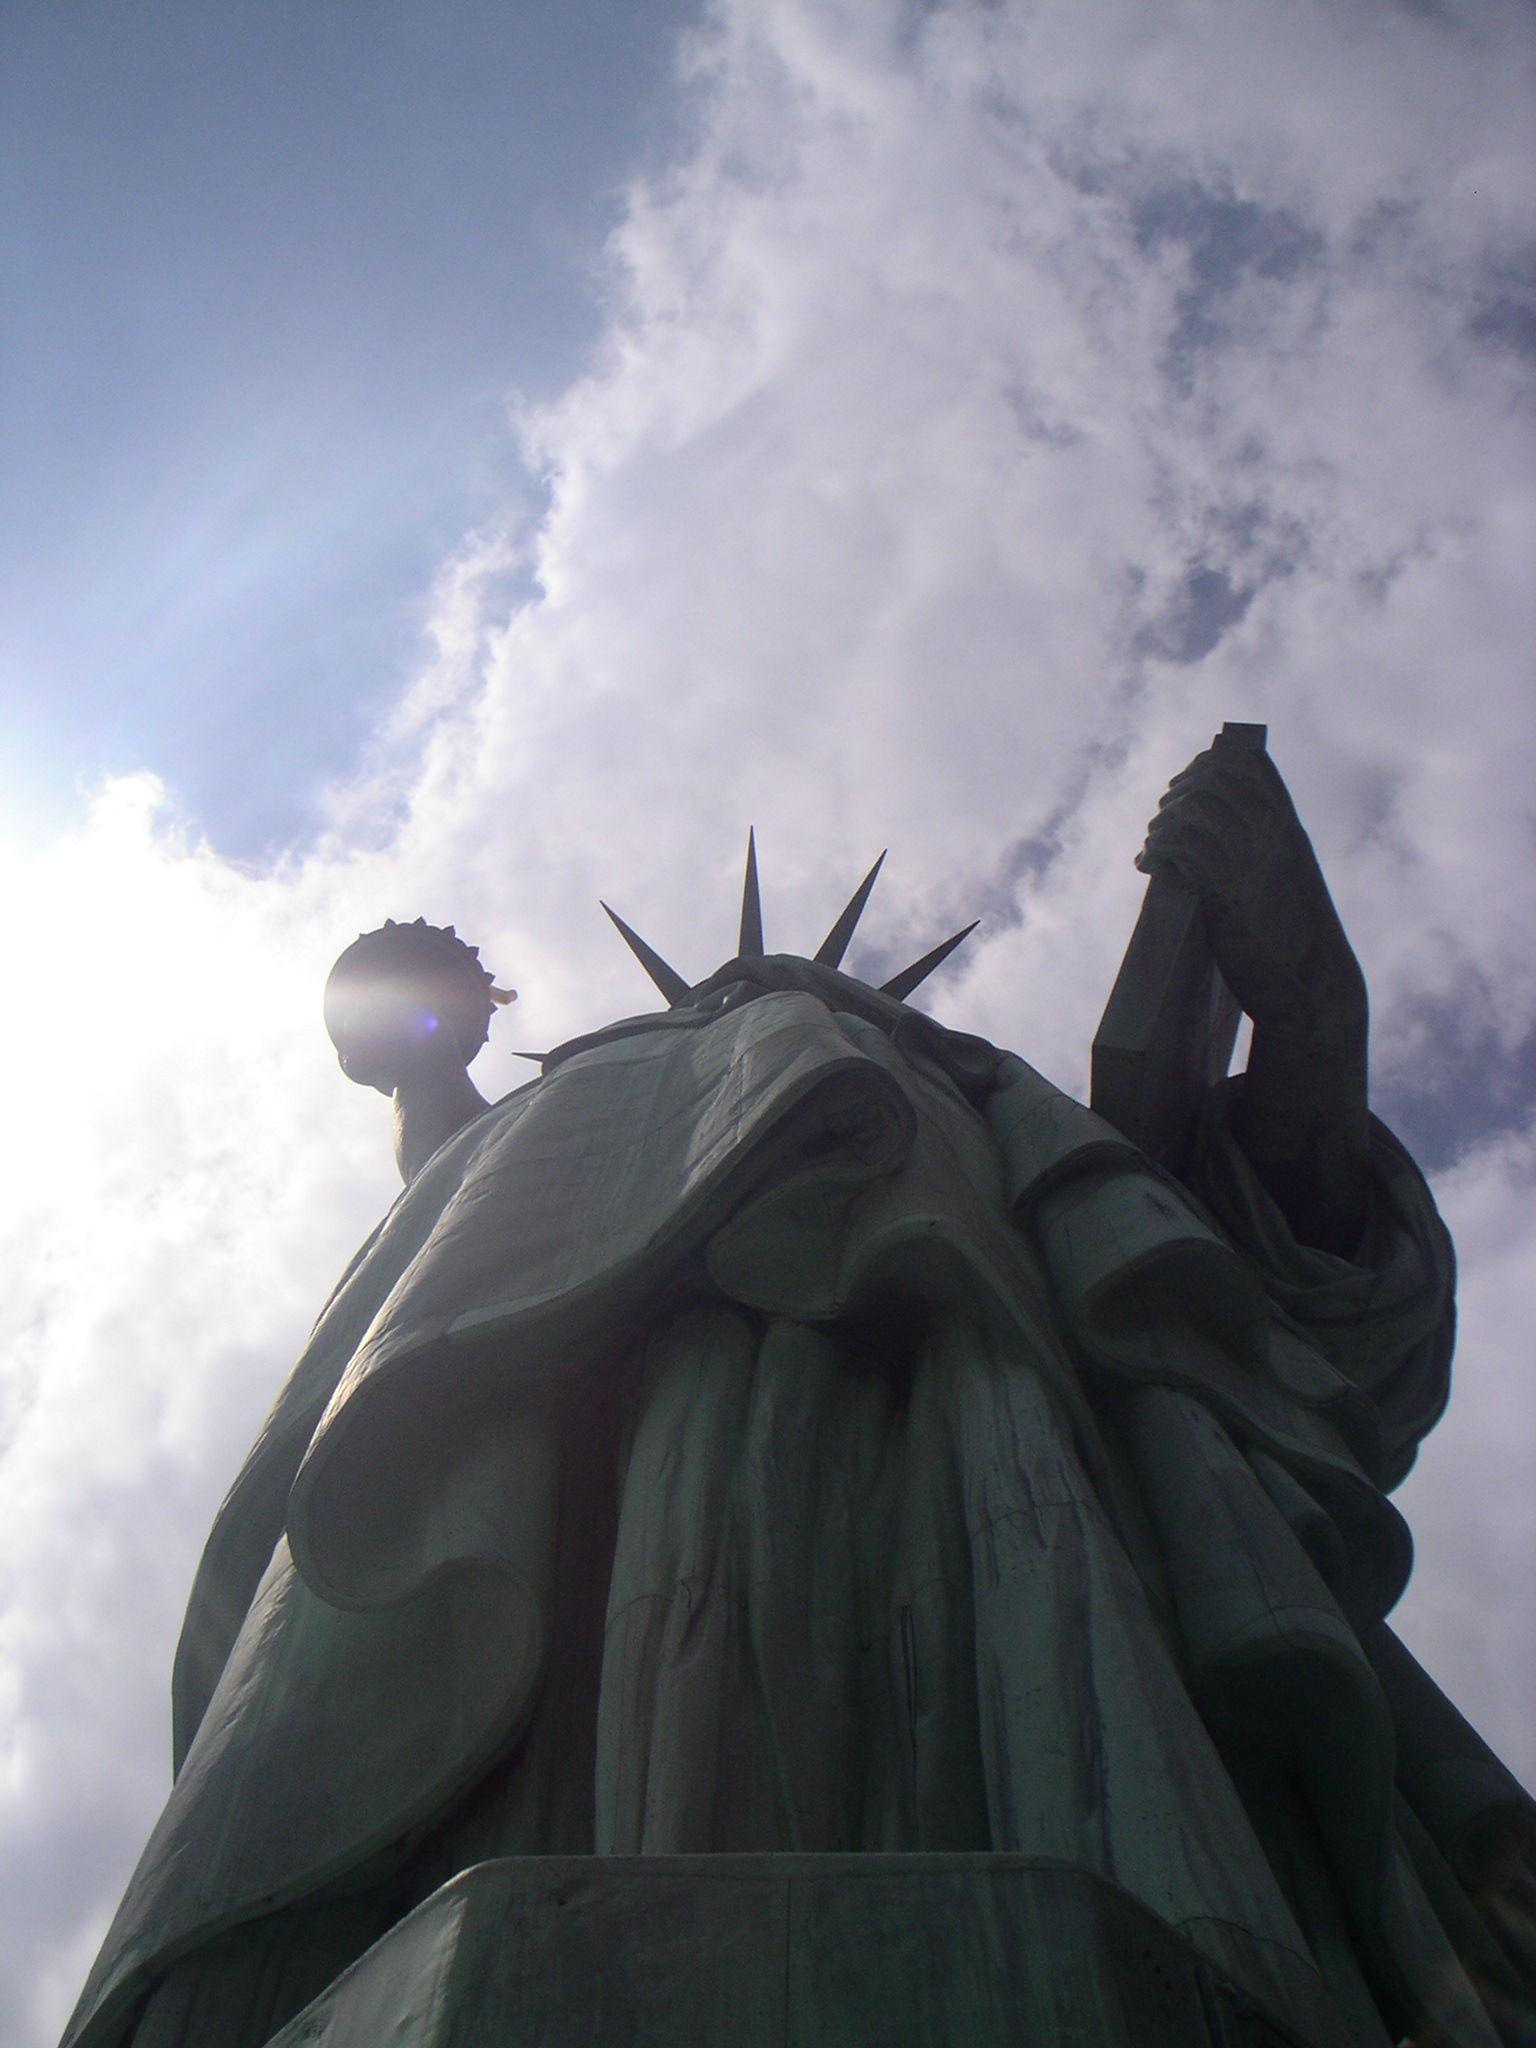 a statue is shown with the sun in the background